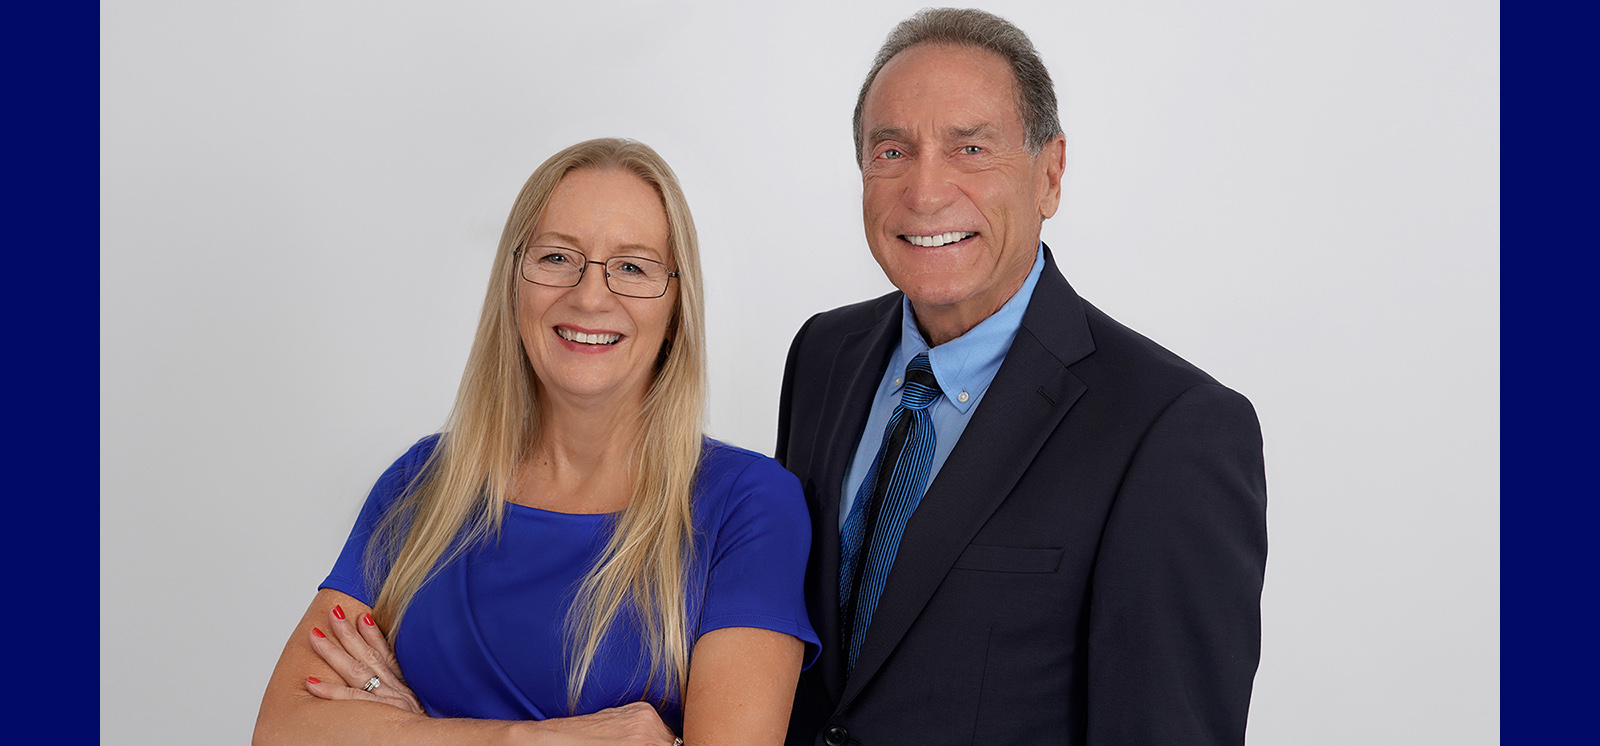 Chuck and Debi Whitfield Join Water Pointe Realty Group